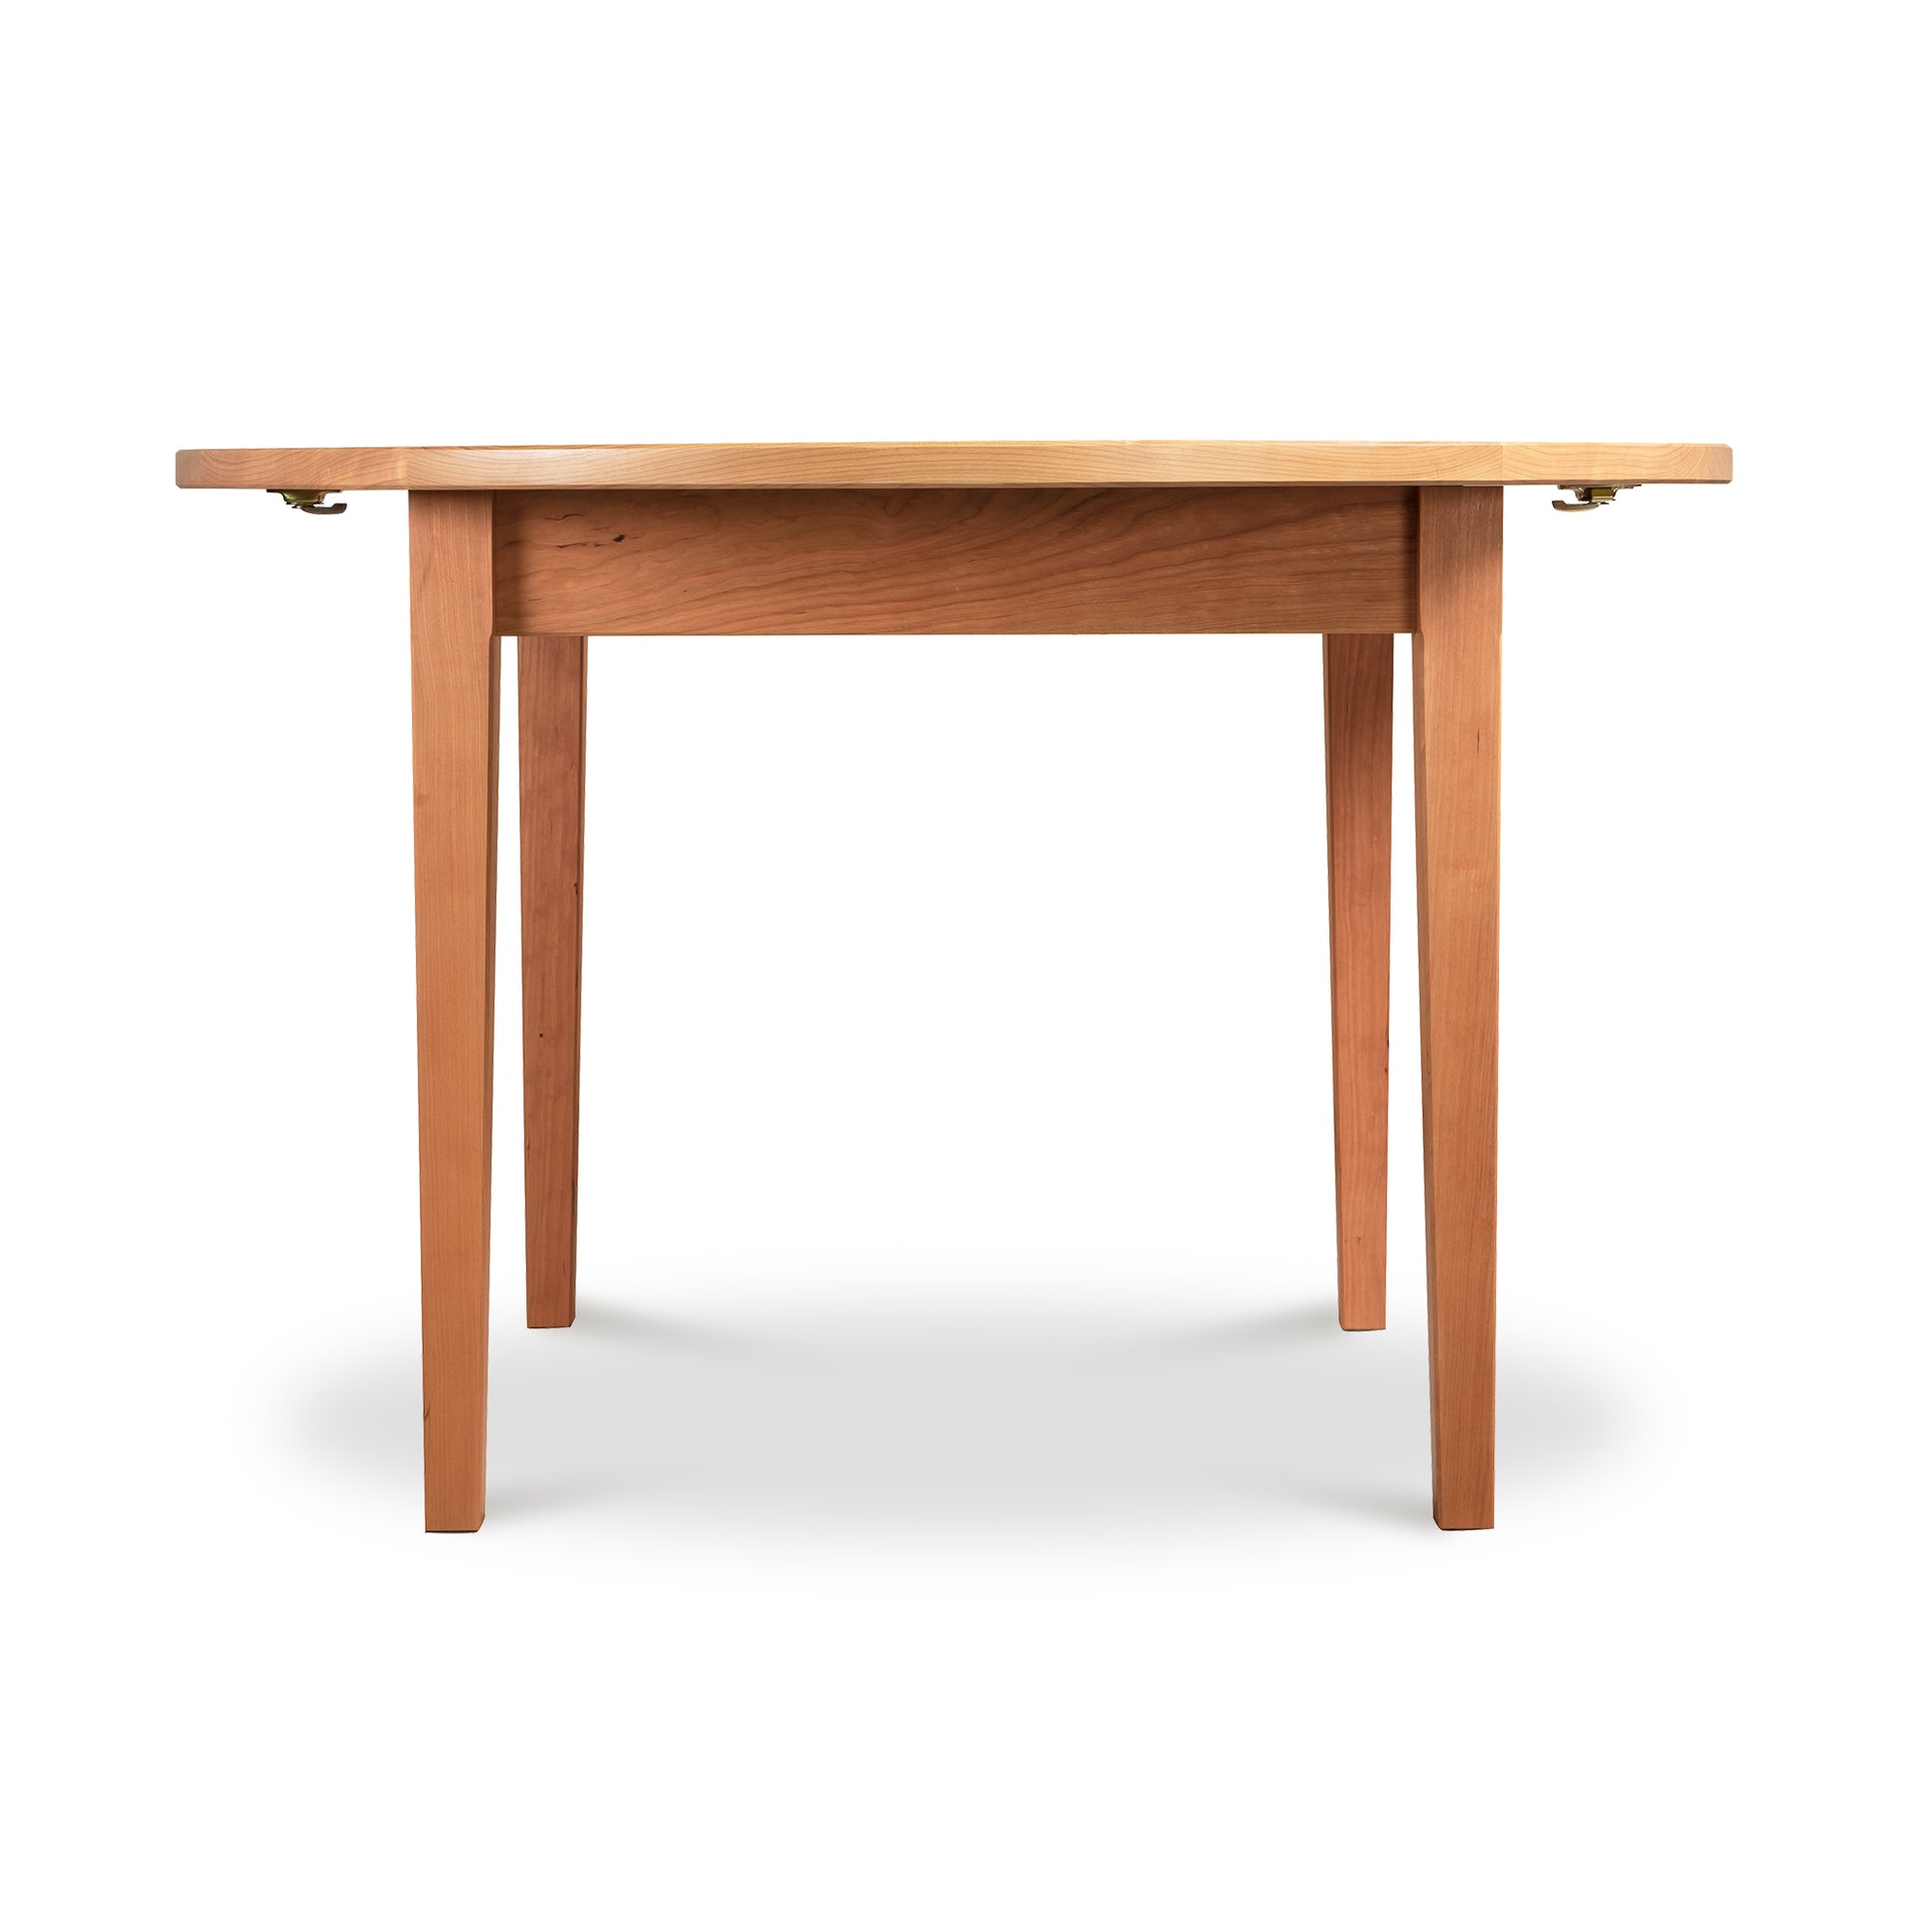 A Vermont Shaker Round Extension Table with a smooth rectangular top and four legs, handcrafted by Maple Corner Woodworks in Vermont, viewed from the front against a plain white background. The table features simple, clean lines and subtle wood grain texture.